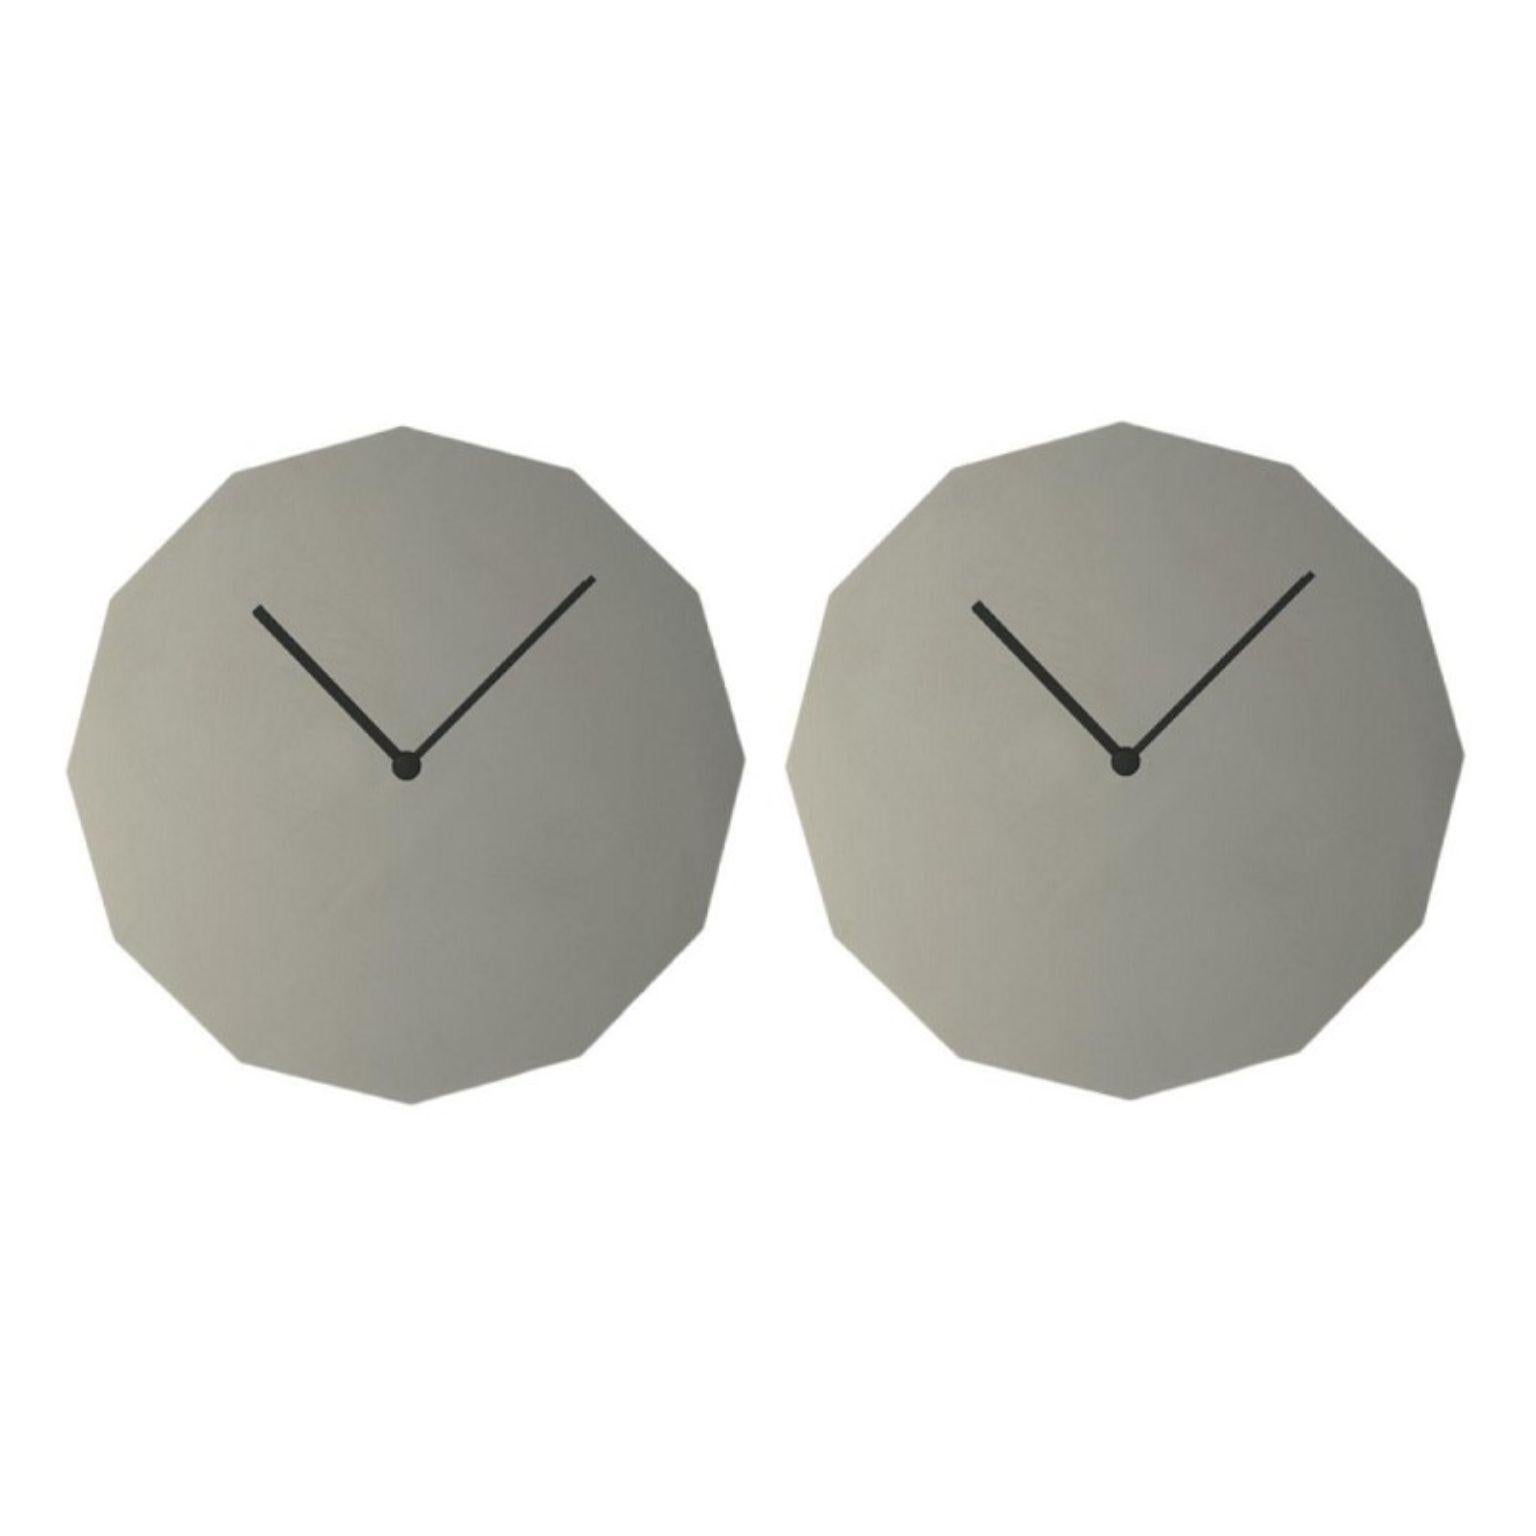 Set of 2 Mirror Steel Twelve Wall Clocks by Sebastian Scherer
Material: crystal glass, stainless steel
Dimensions: ø 11.8 cm
Also available in mirror steel and brass
Colour: glossy stainless steel
Also available in black, silk grey, rose, high